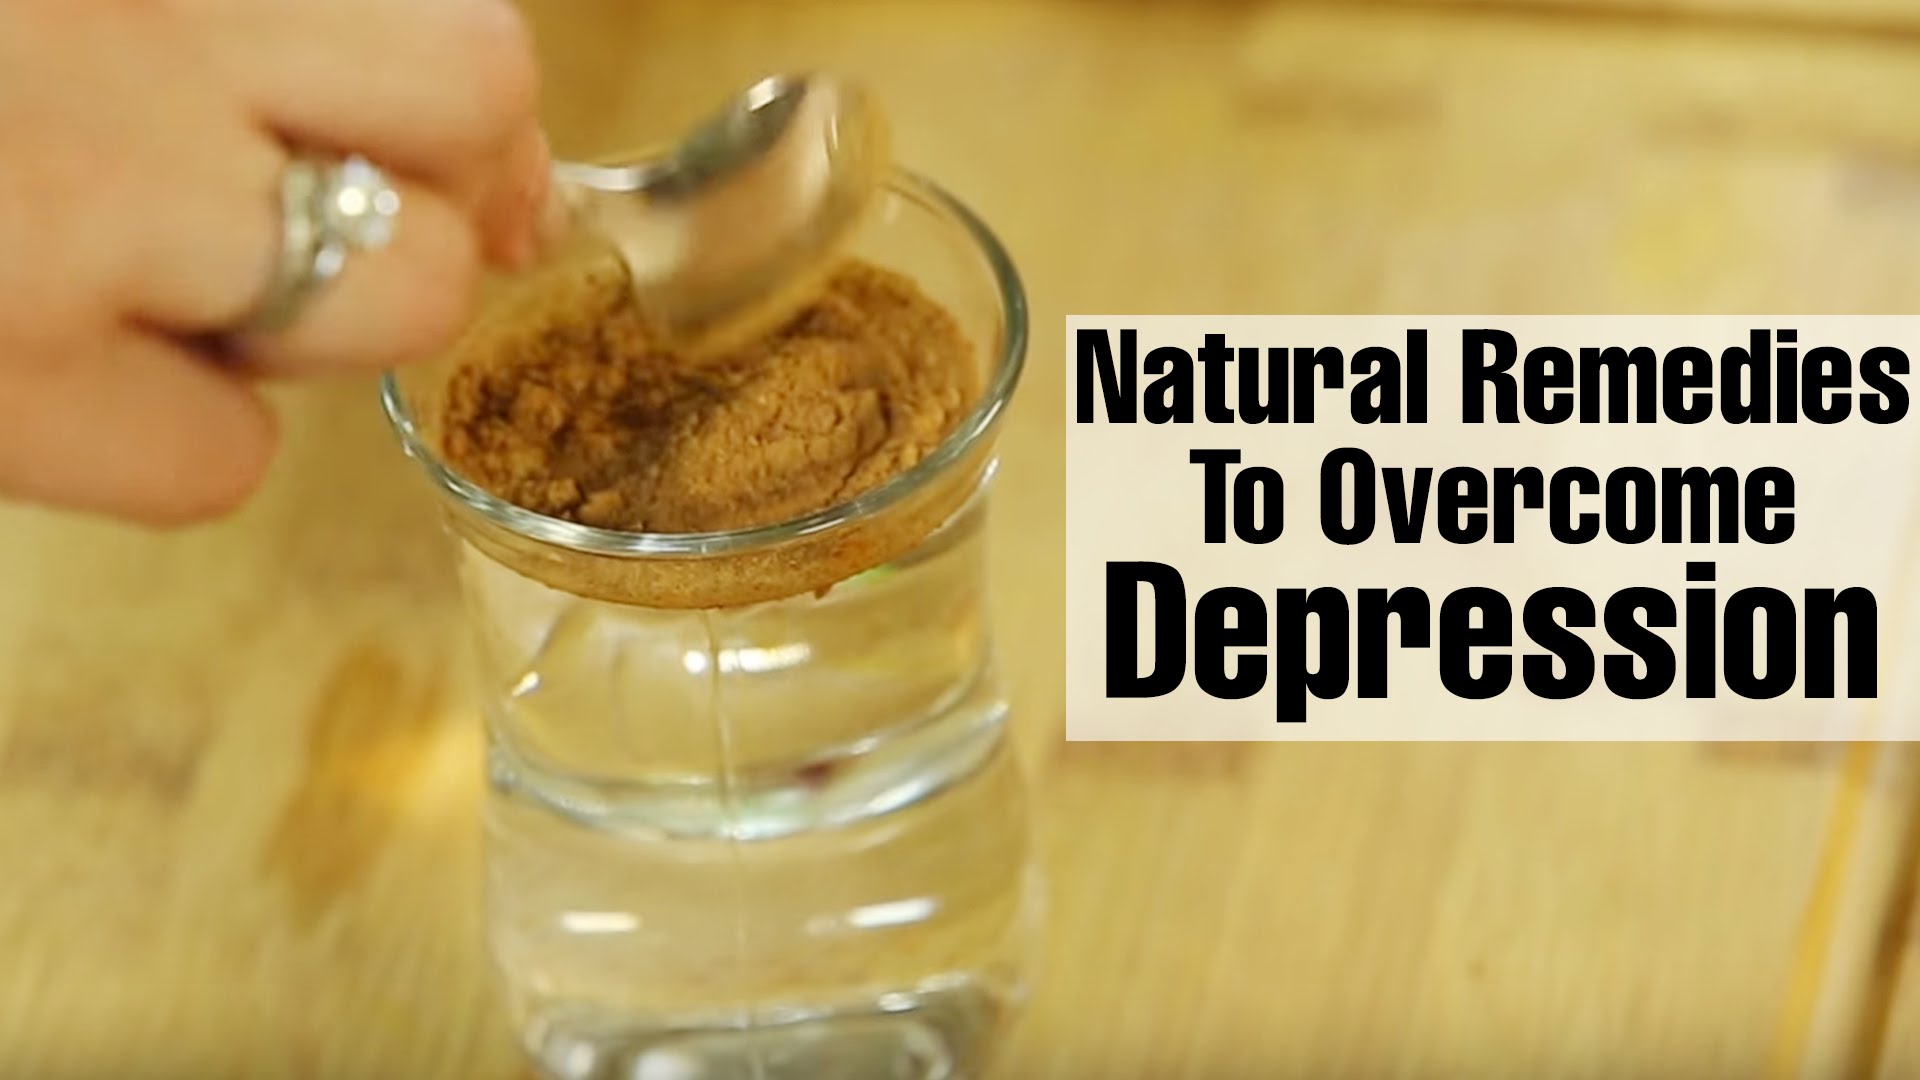 Natural and Herbal Remedies for Depression